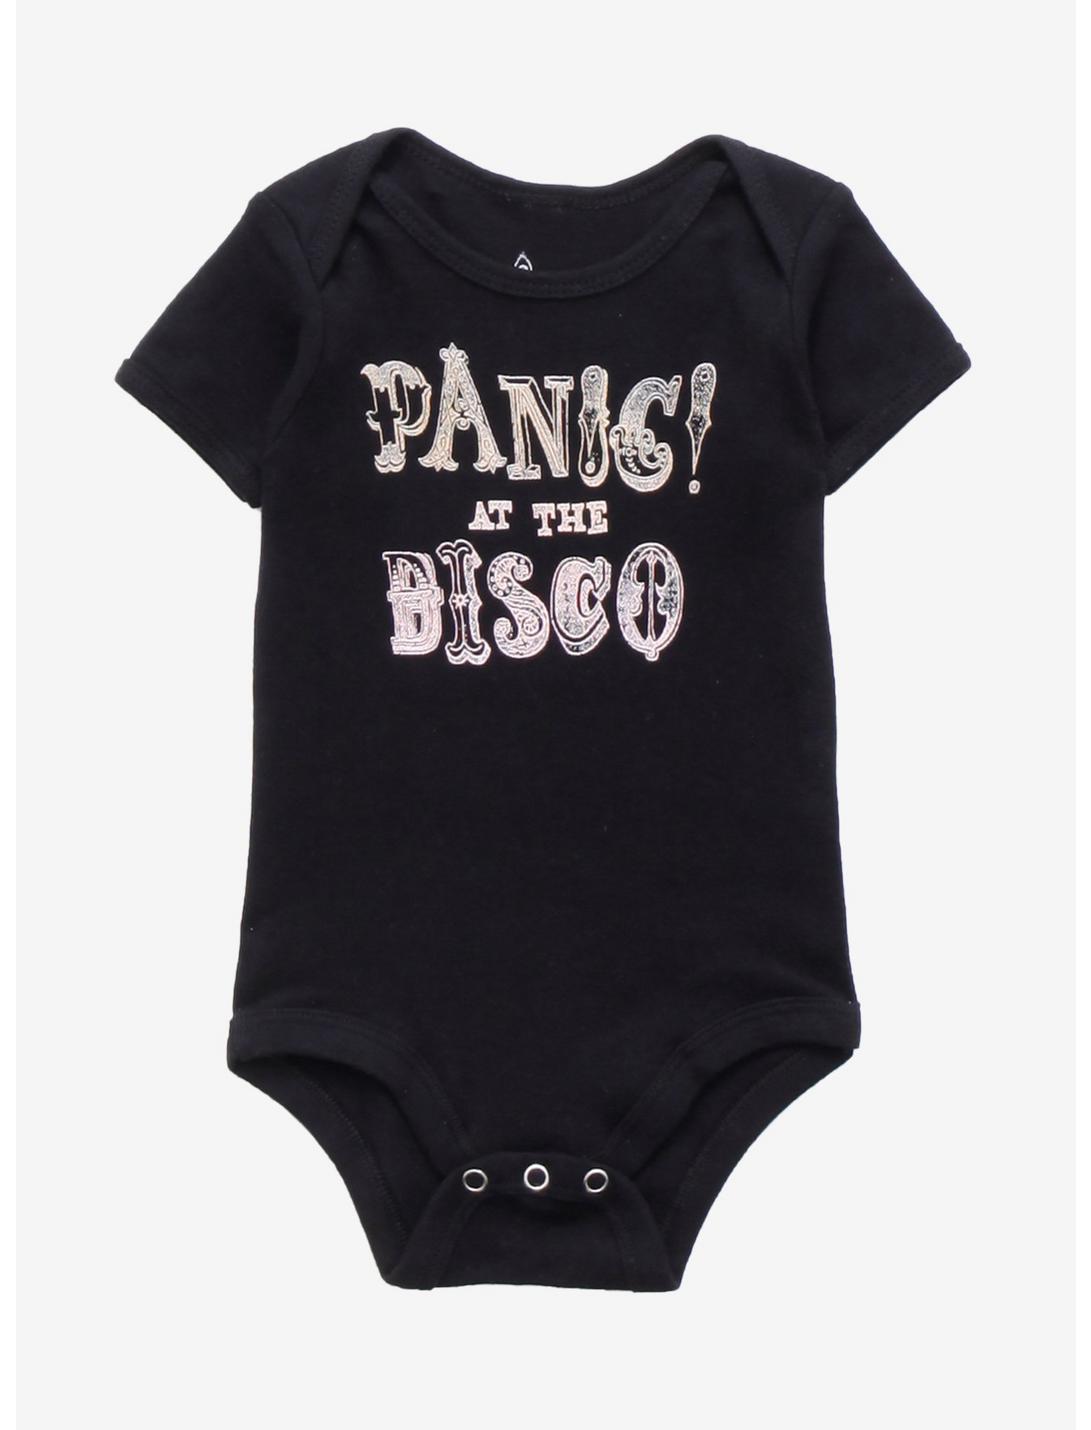 Panic! at the Disco Logo Infant One-Piece, BLACK, hi-res